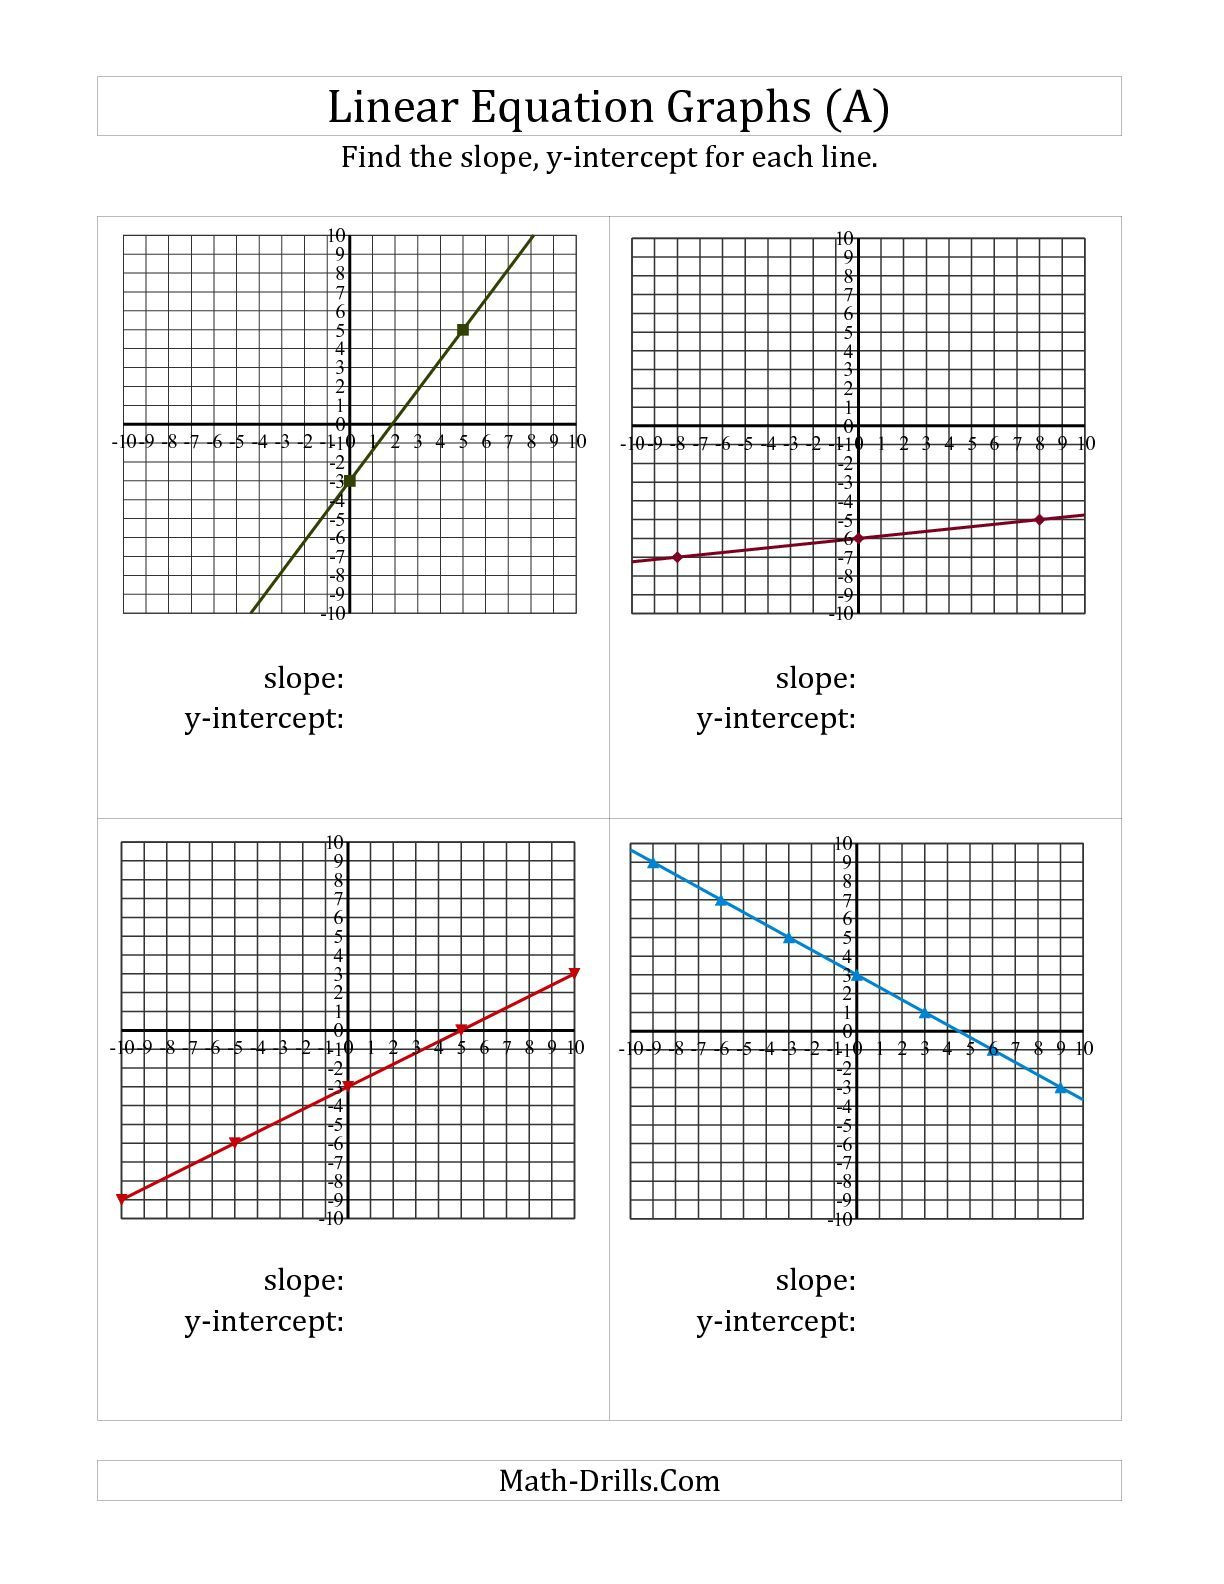 Graphing Linear Equations Practice Worksheet the Finding Slope and Y Intercept From A Linear Equation